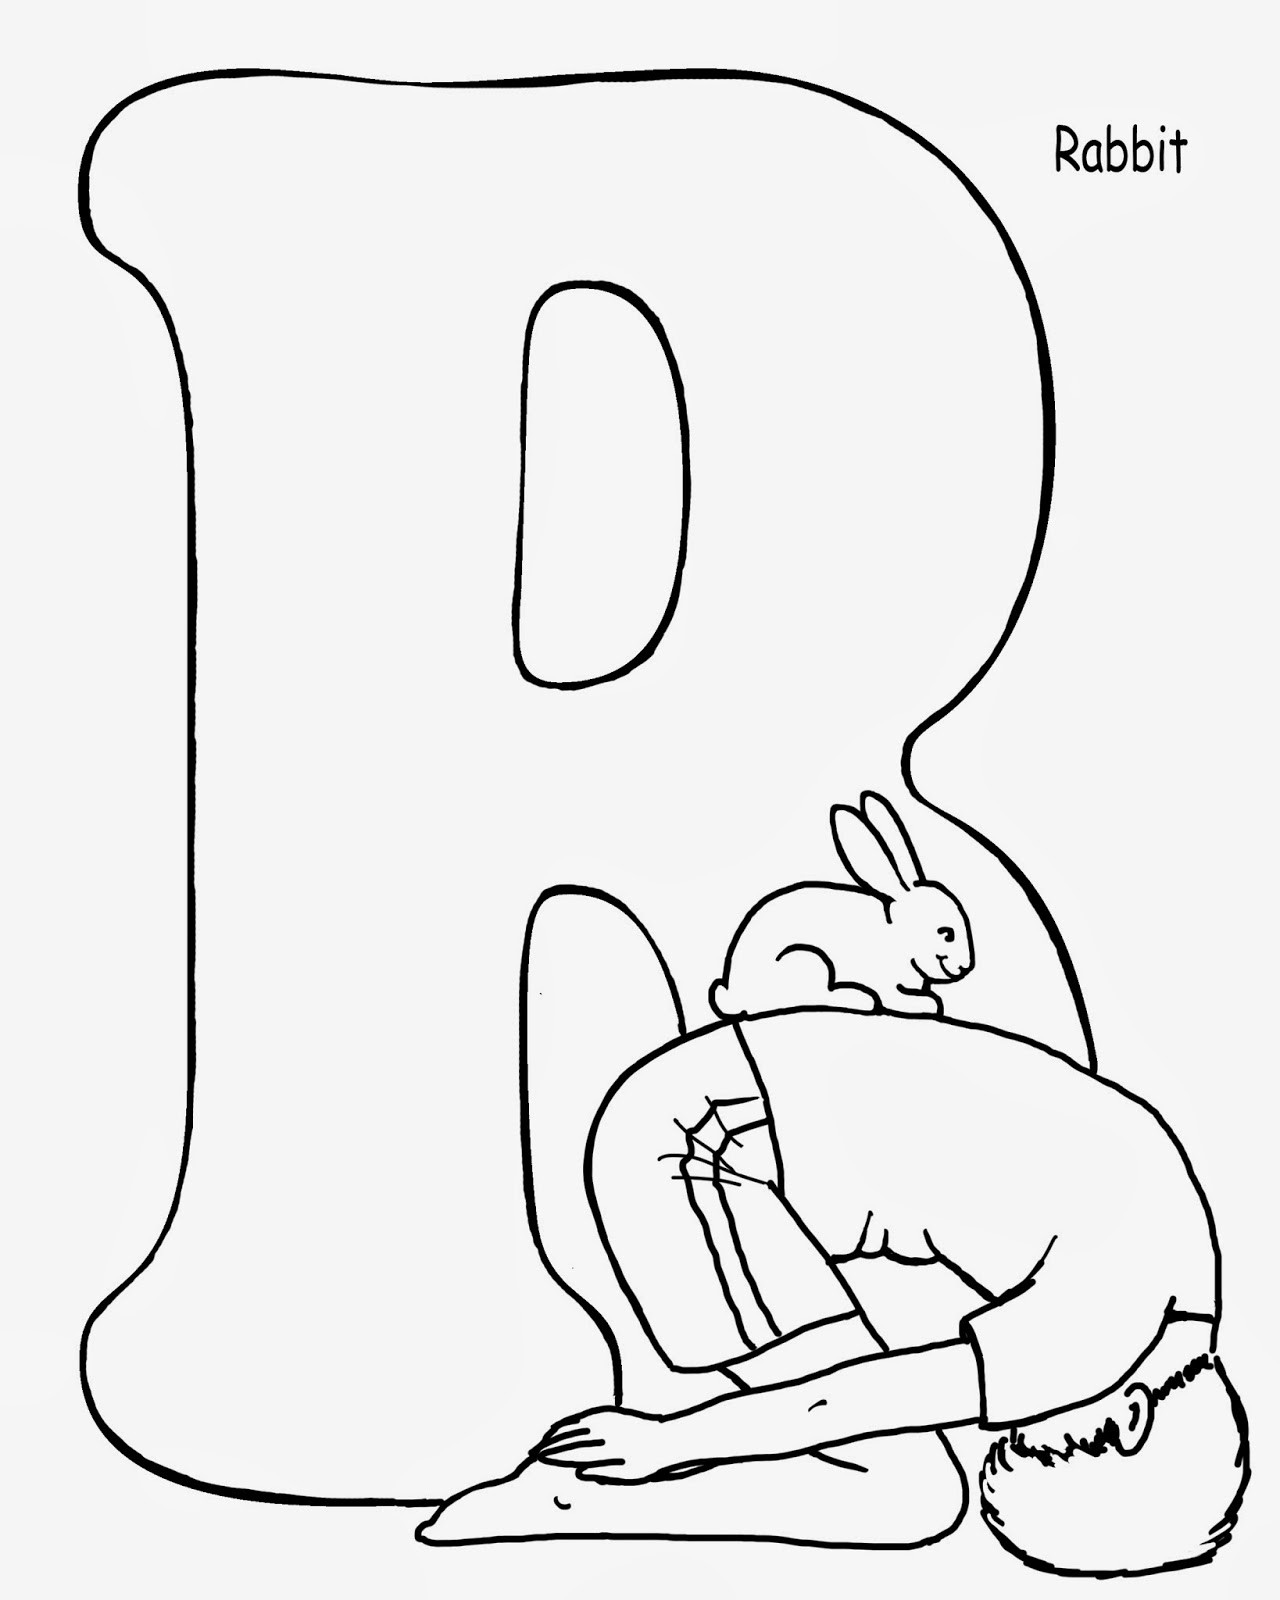 Yoga Coloring Pages For Kids
 Yoga for Kids The ABCs of Yoga for Kids Easter Coloring